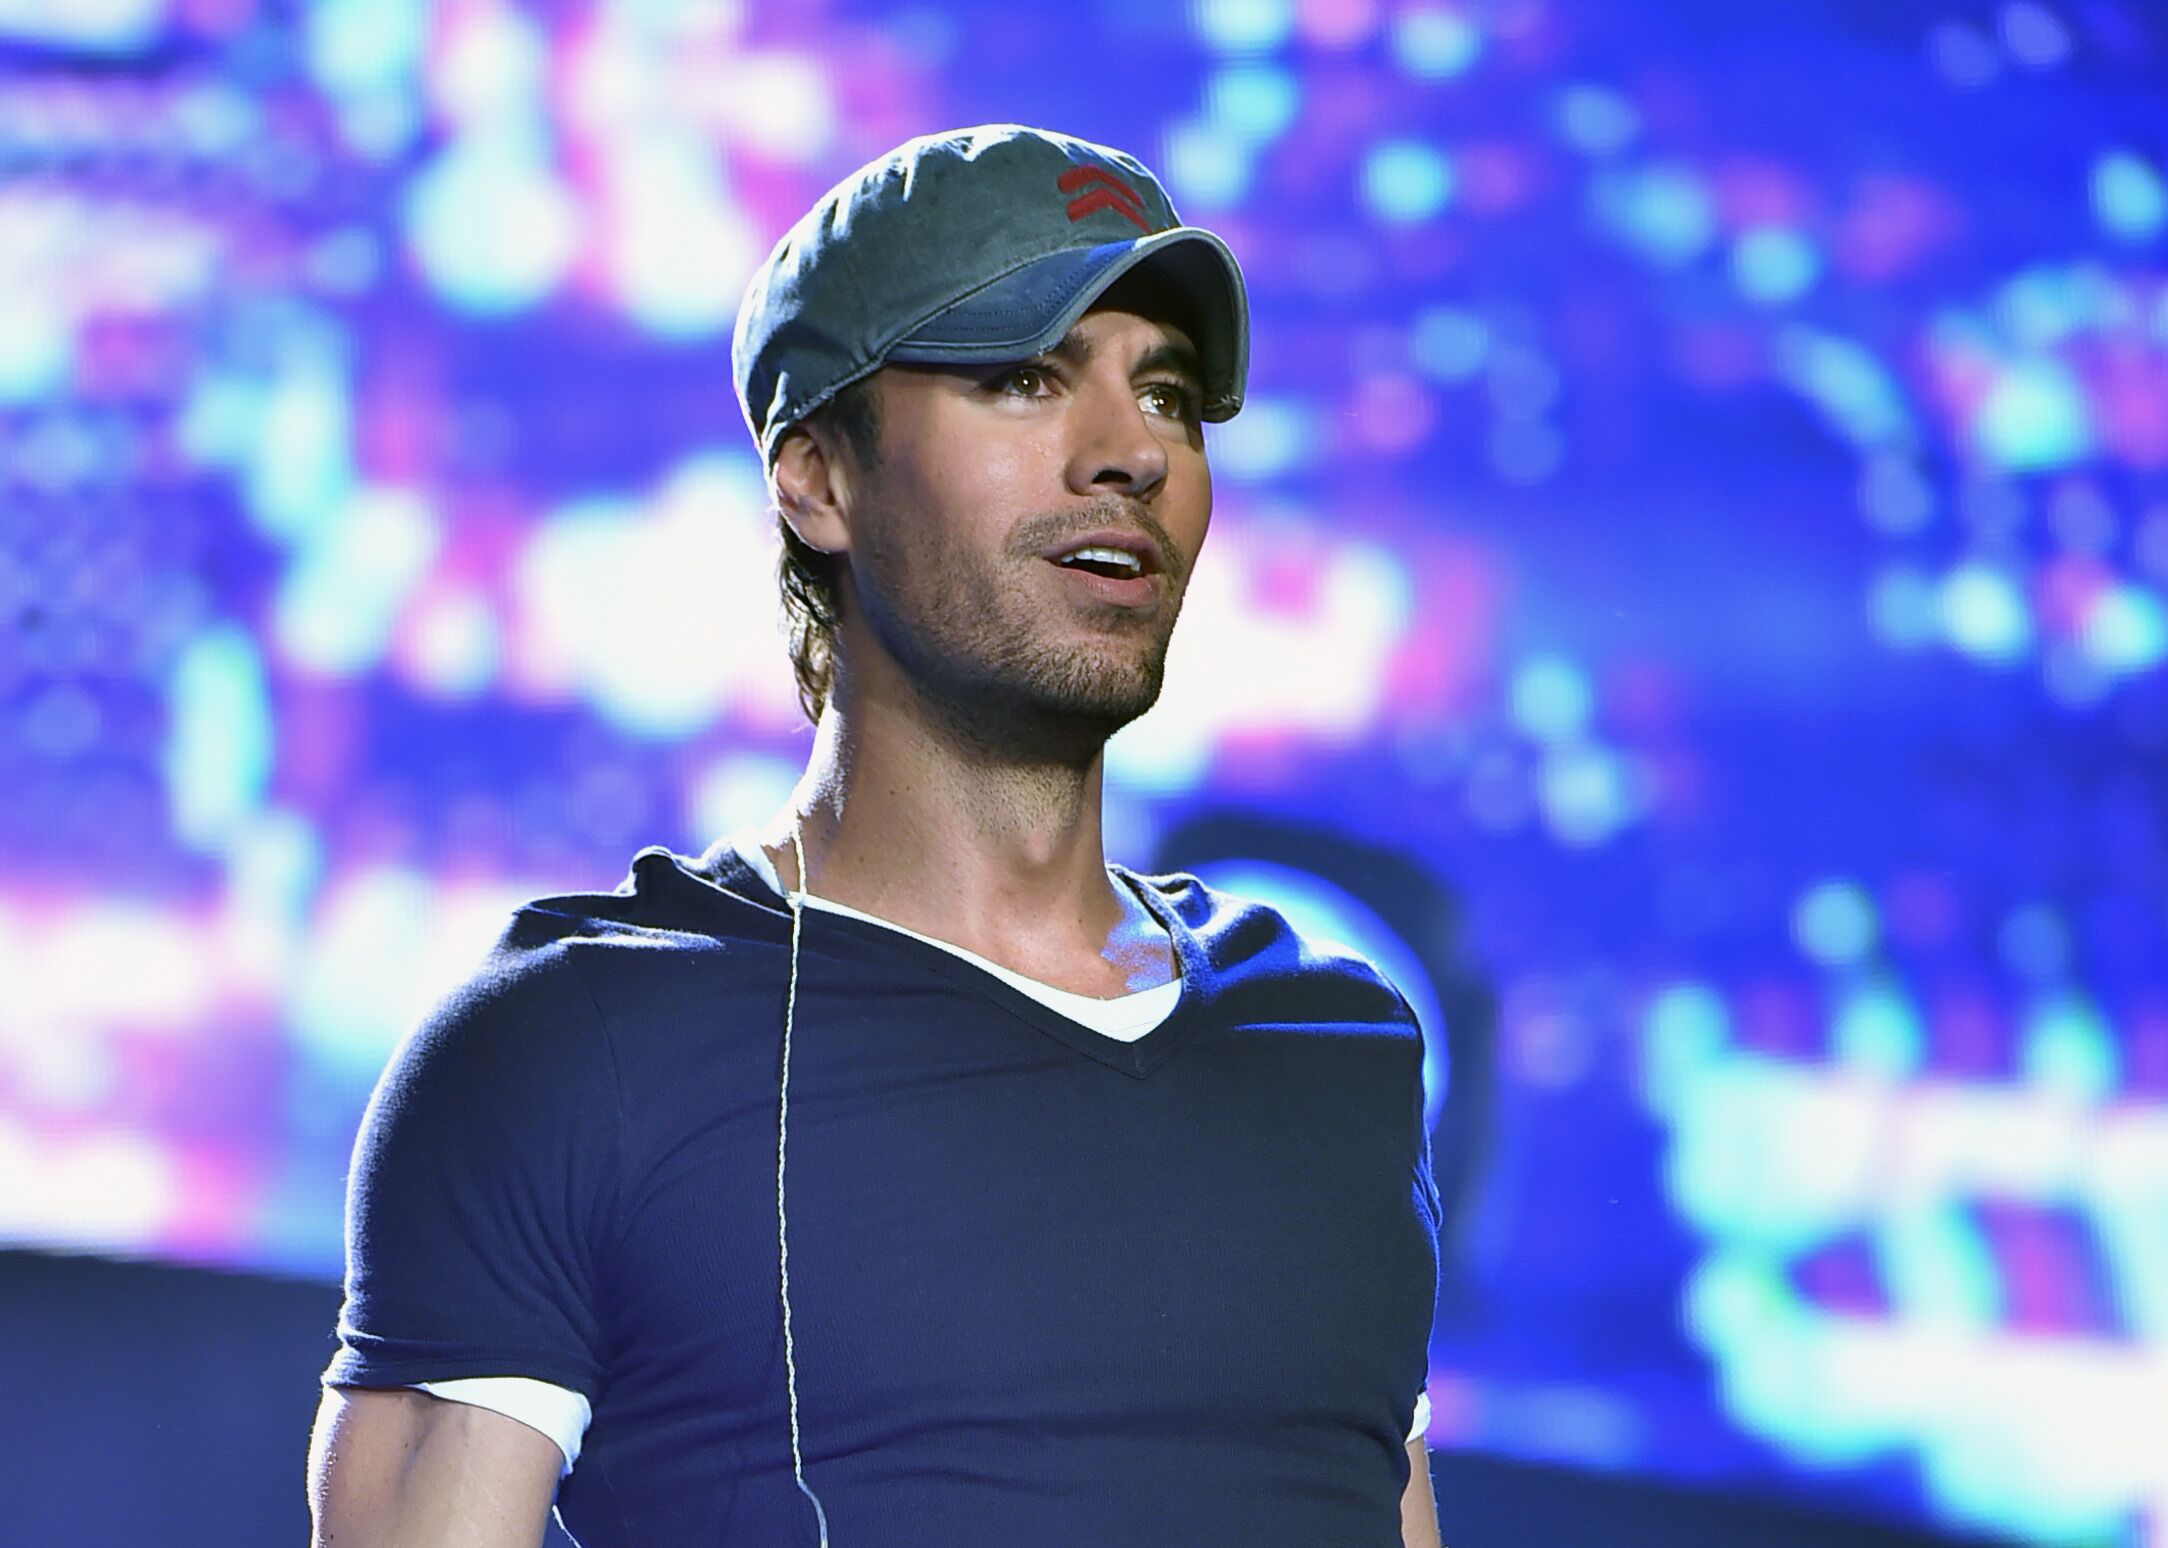 Enrique Iglesias performs at the opening night of US tour at Prudential Center on September 12, 2014, in Newark, New Jersey | Photo: Theo Wargo/Getty Images